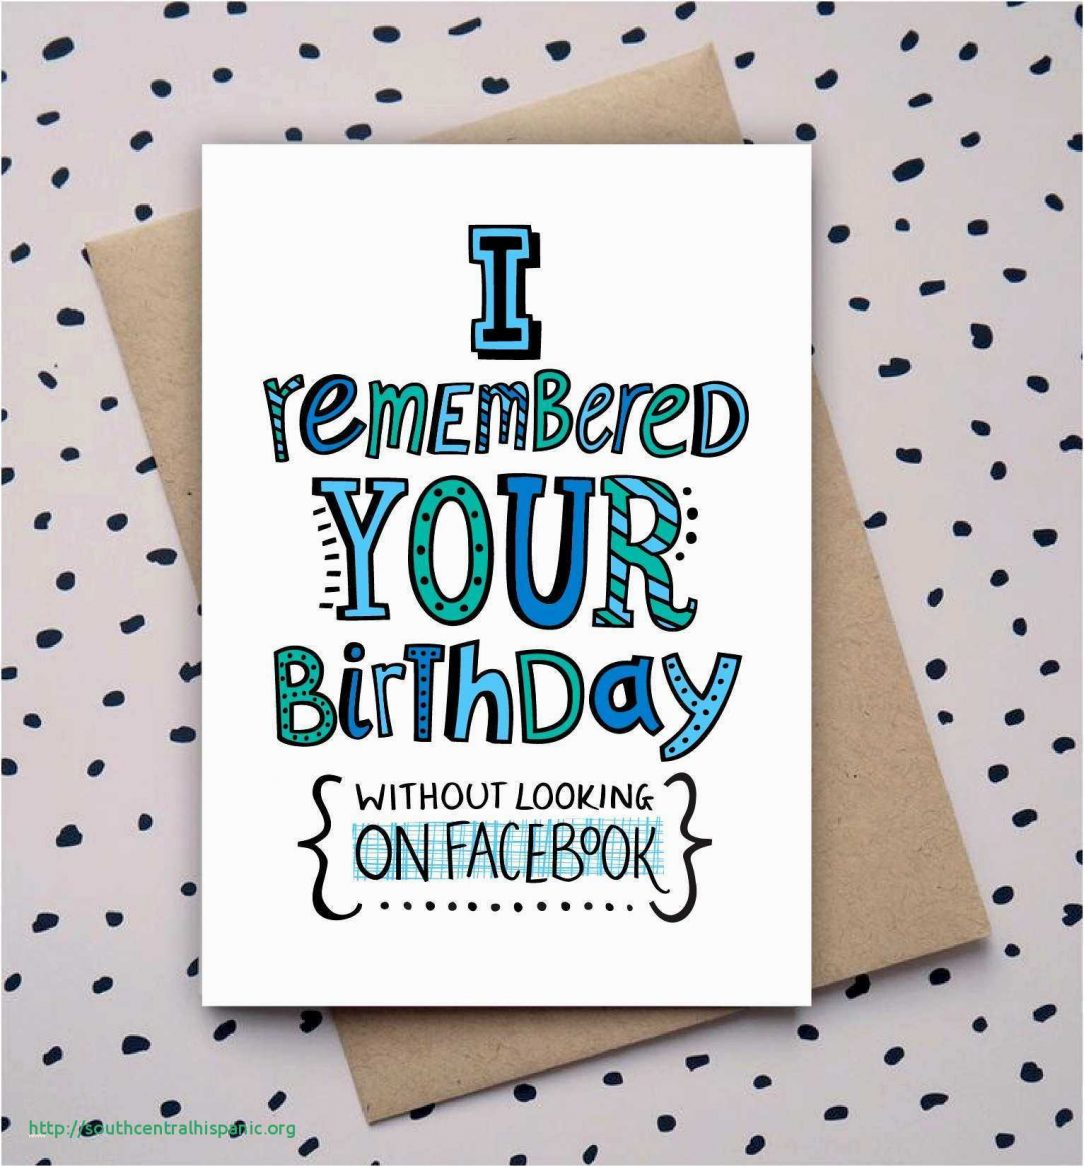 Cards For Dads Birthday Ideas Cute Birthday Card Ideas For Dad Dads Cards Handmade Wording Text A